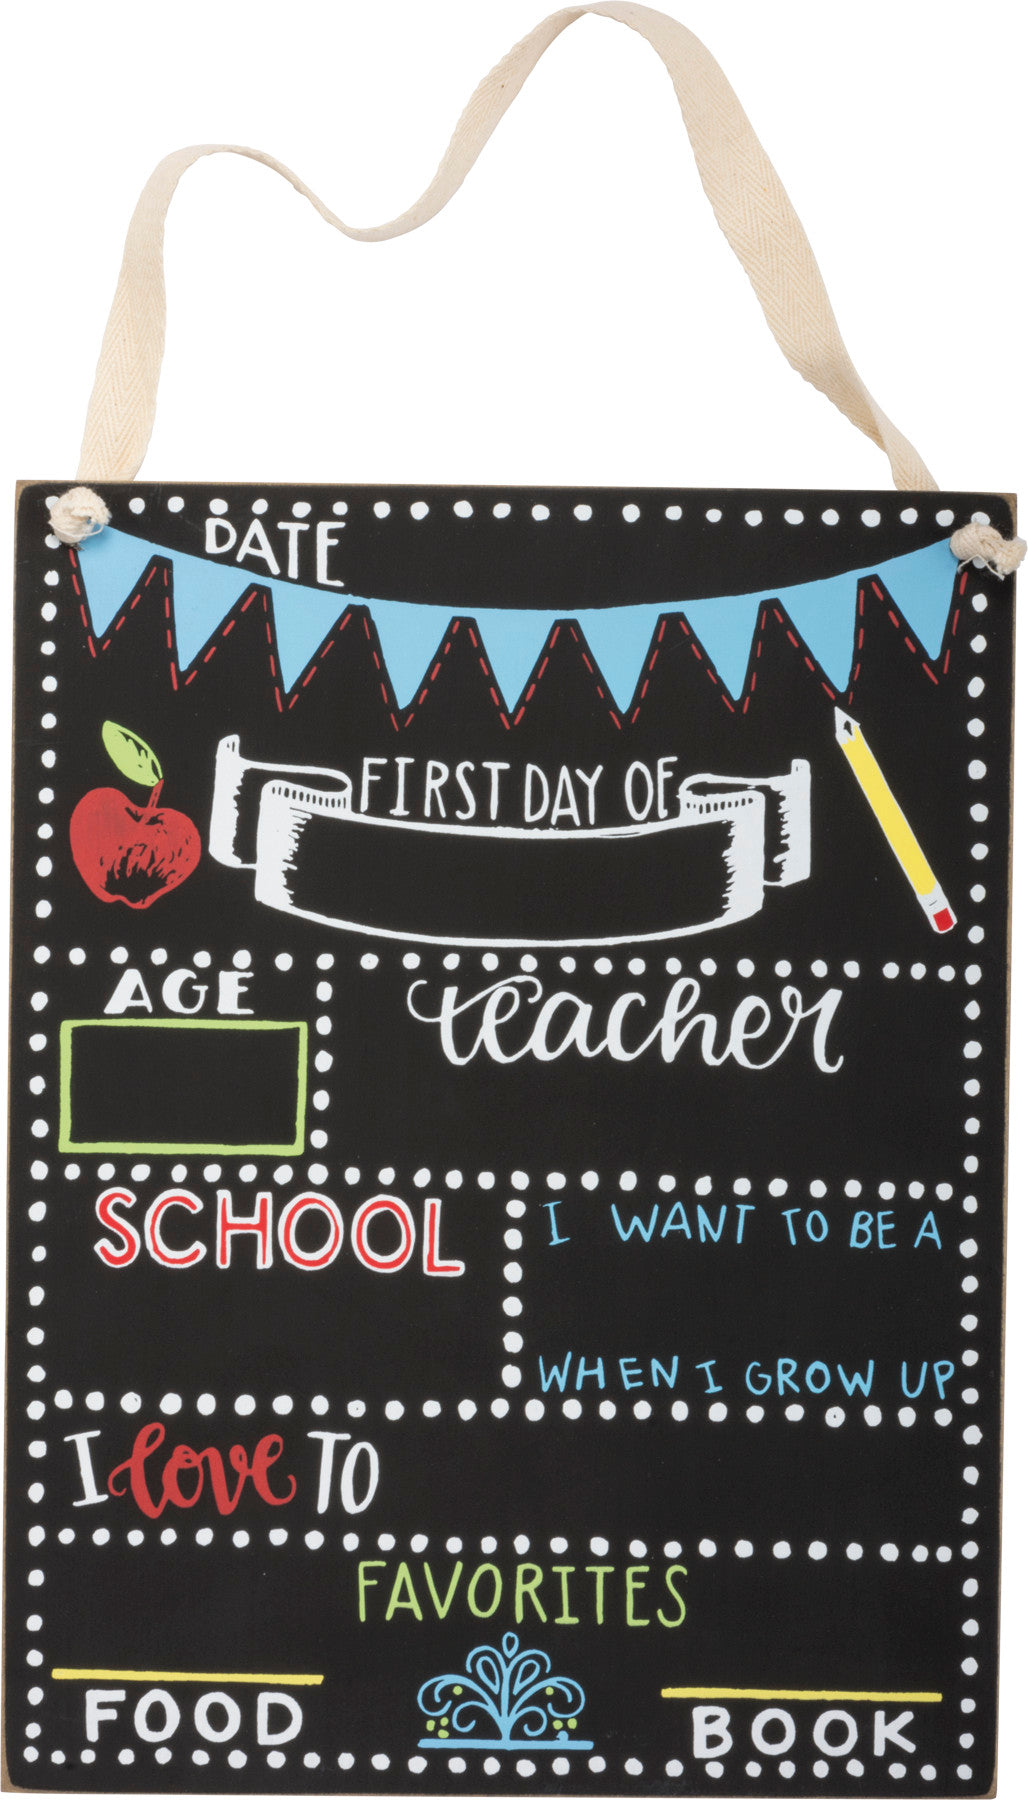 Chalk sign - first day of school